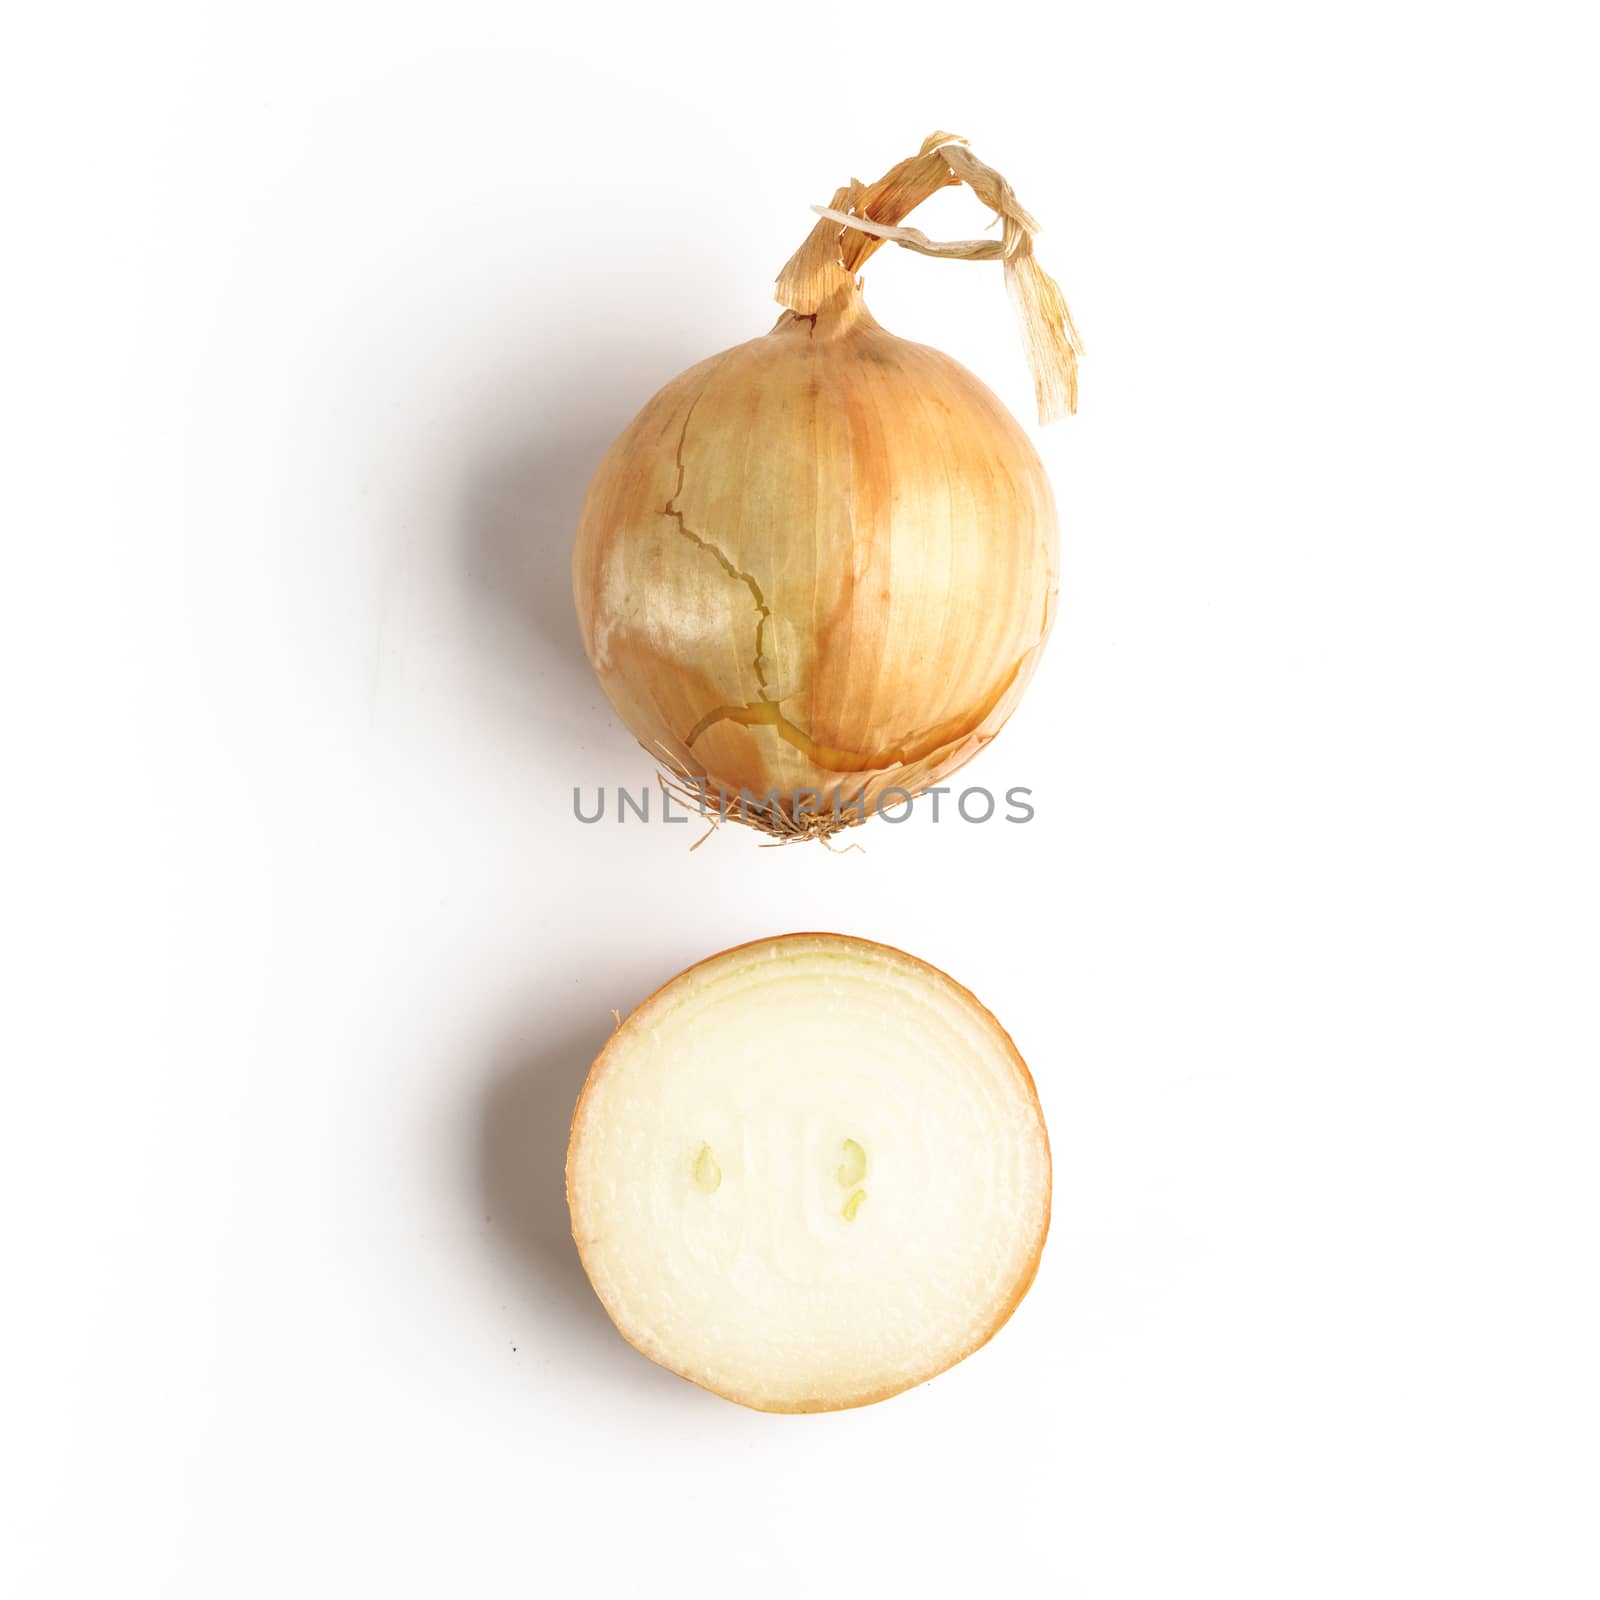 Onion full and half. Isolated on white with clipping path. Top view or flat-lay. Copy space.